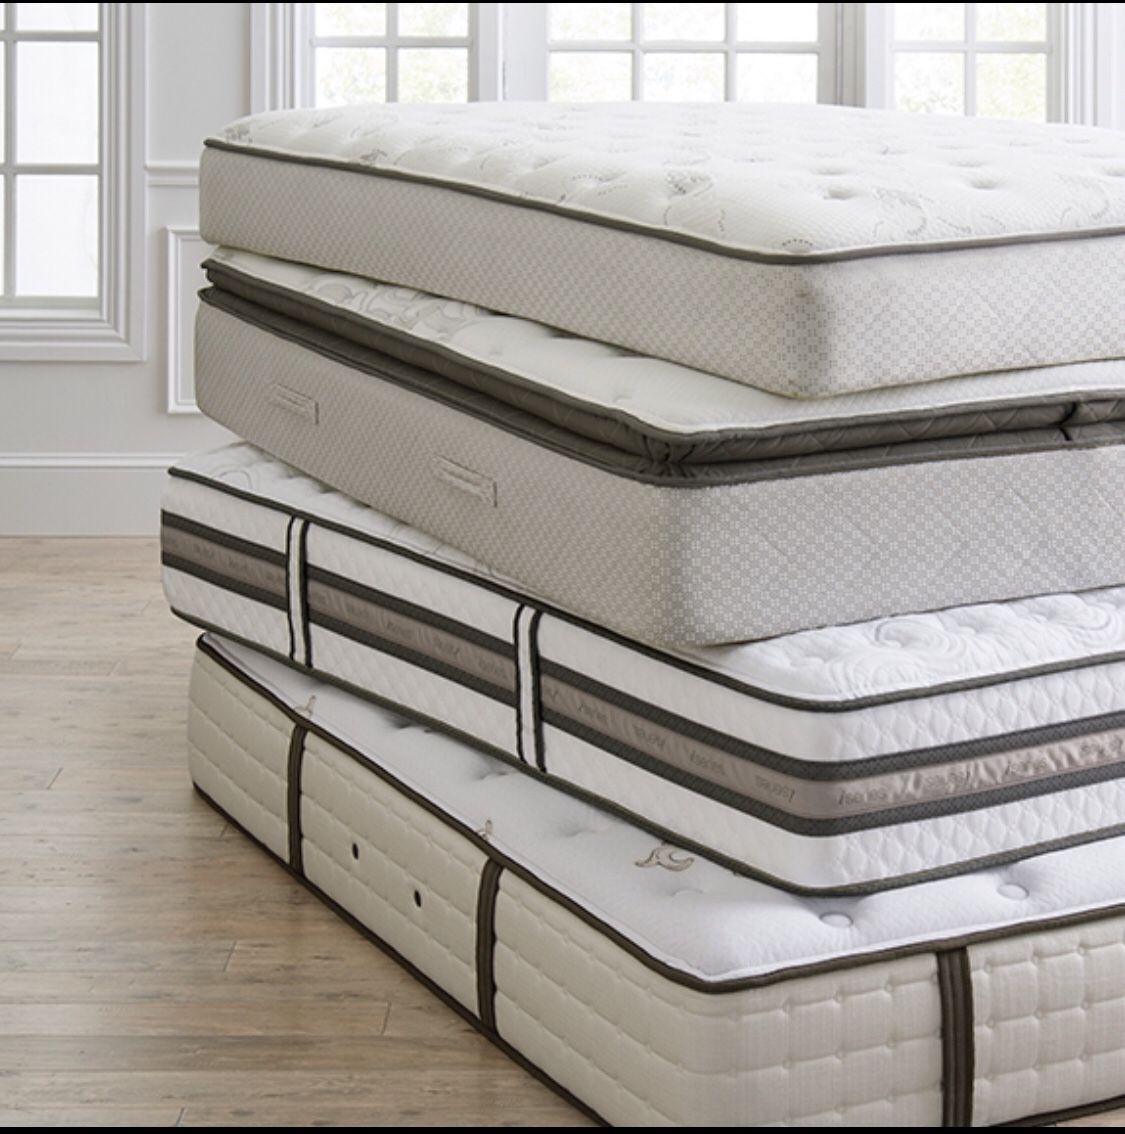 New Queen mattress and boxspring available on all sizes! We delivered 